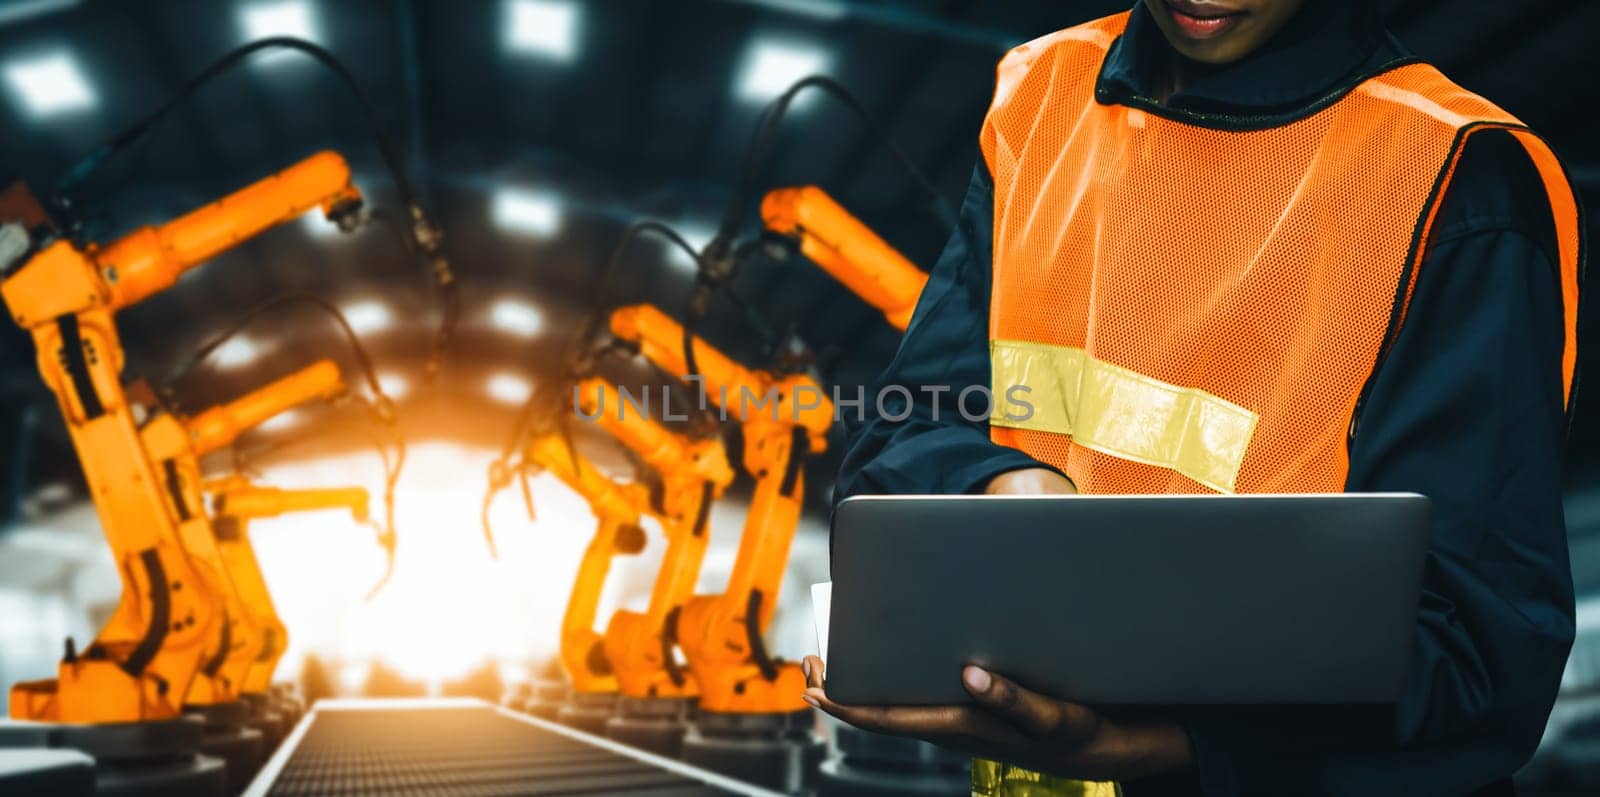 MLP Engineer use advanced robotic software to control industry robot arm in factory. Automation manufacturing process controlled by specialist using IOT software connected to internet network.